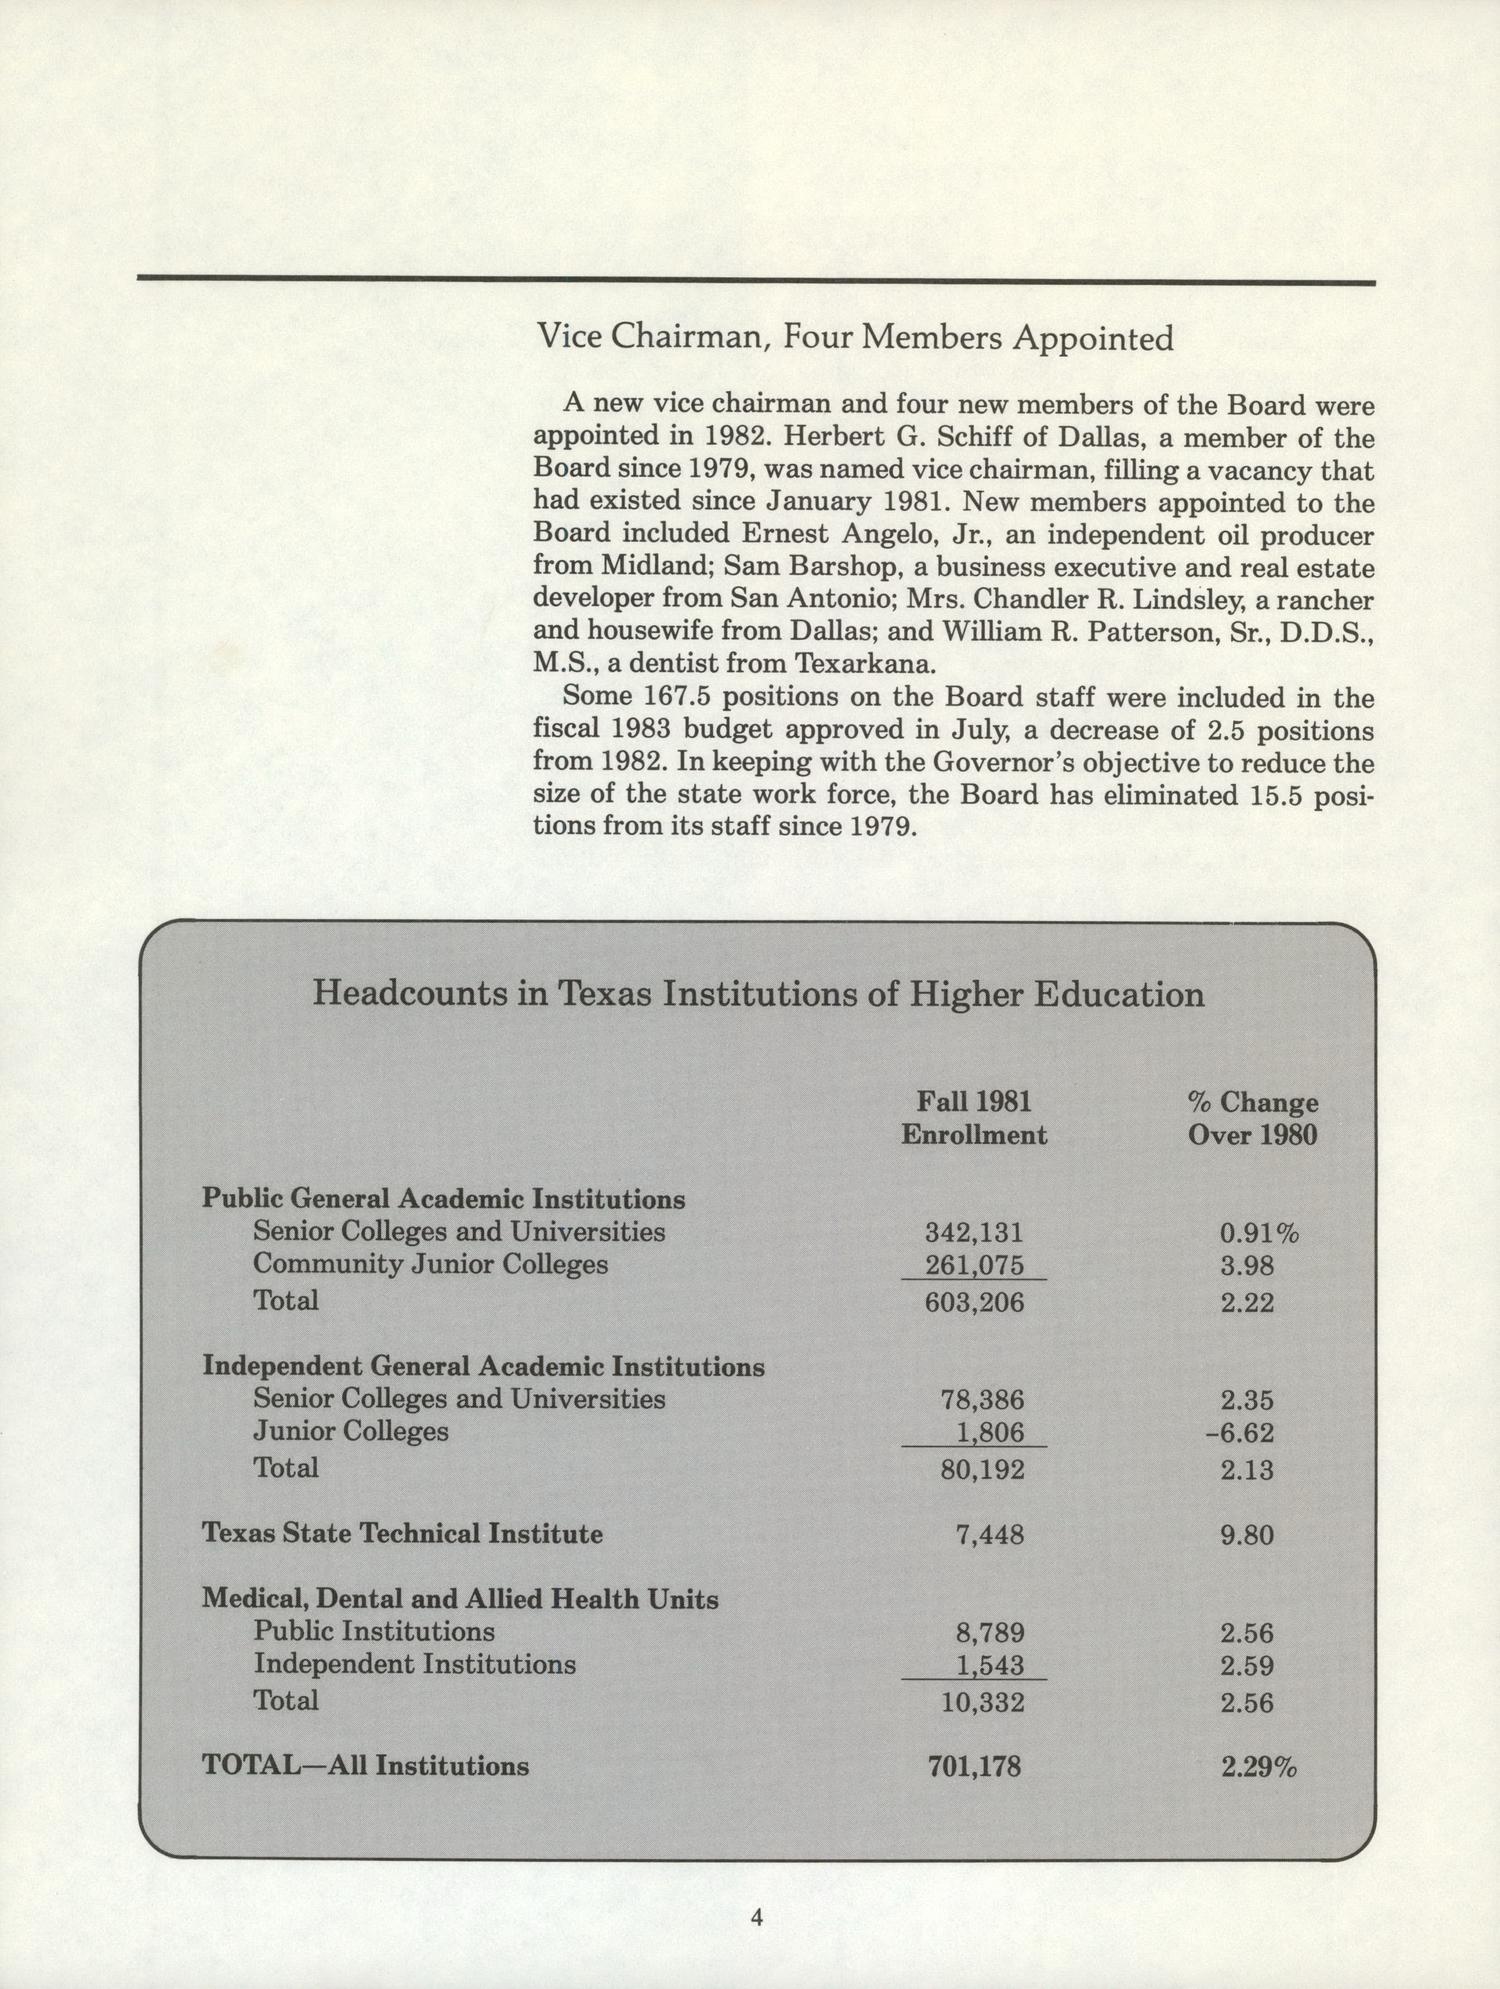 Texas College and University System Coordinating Board Annual Report: 1982
                                                
                                                    4
                                                